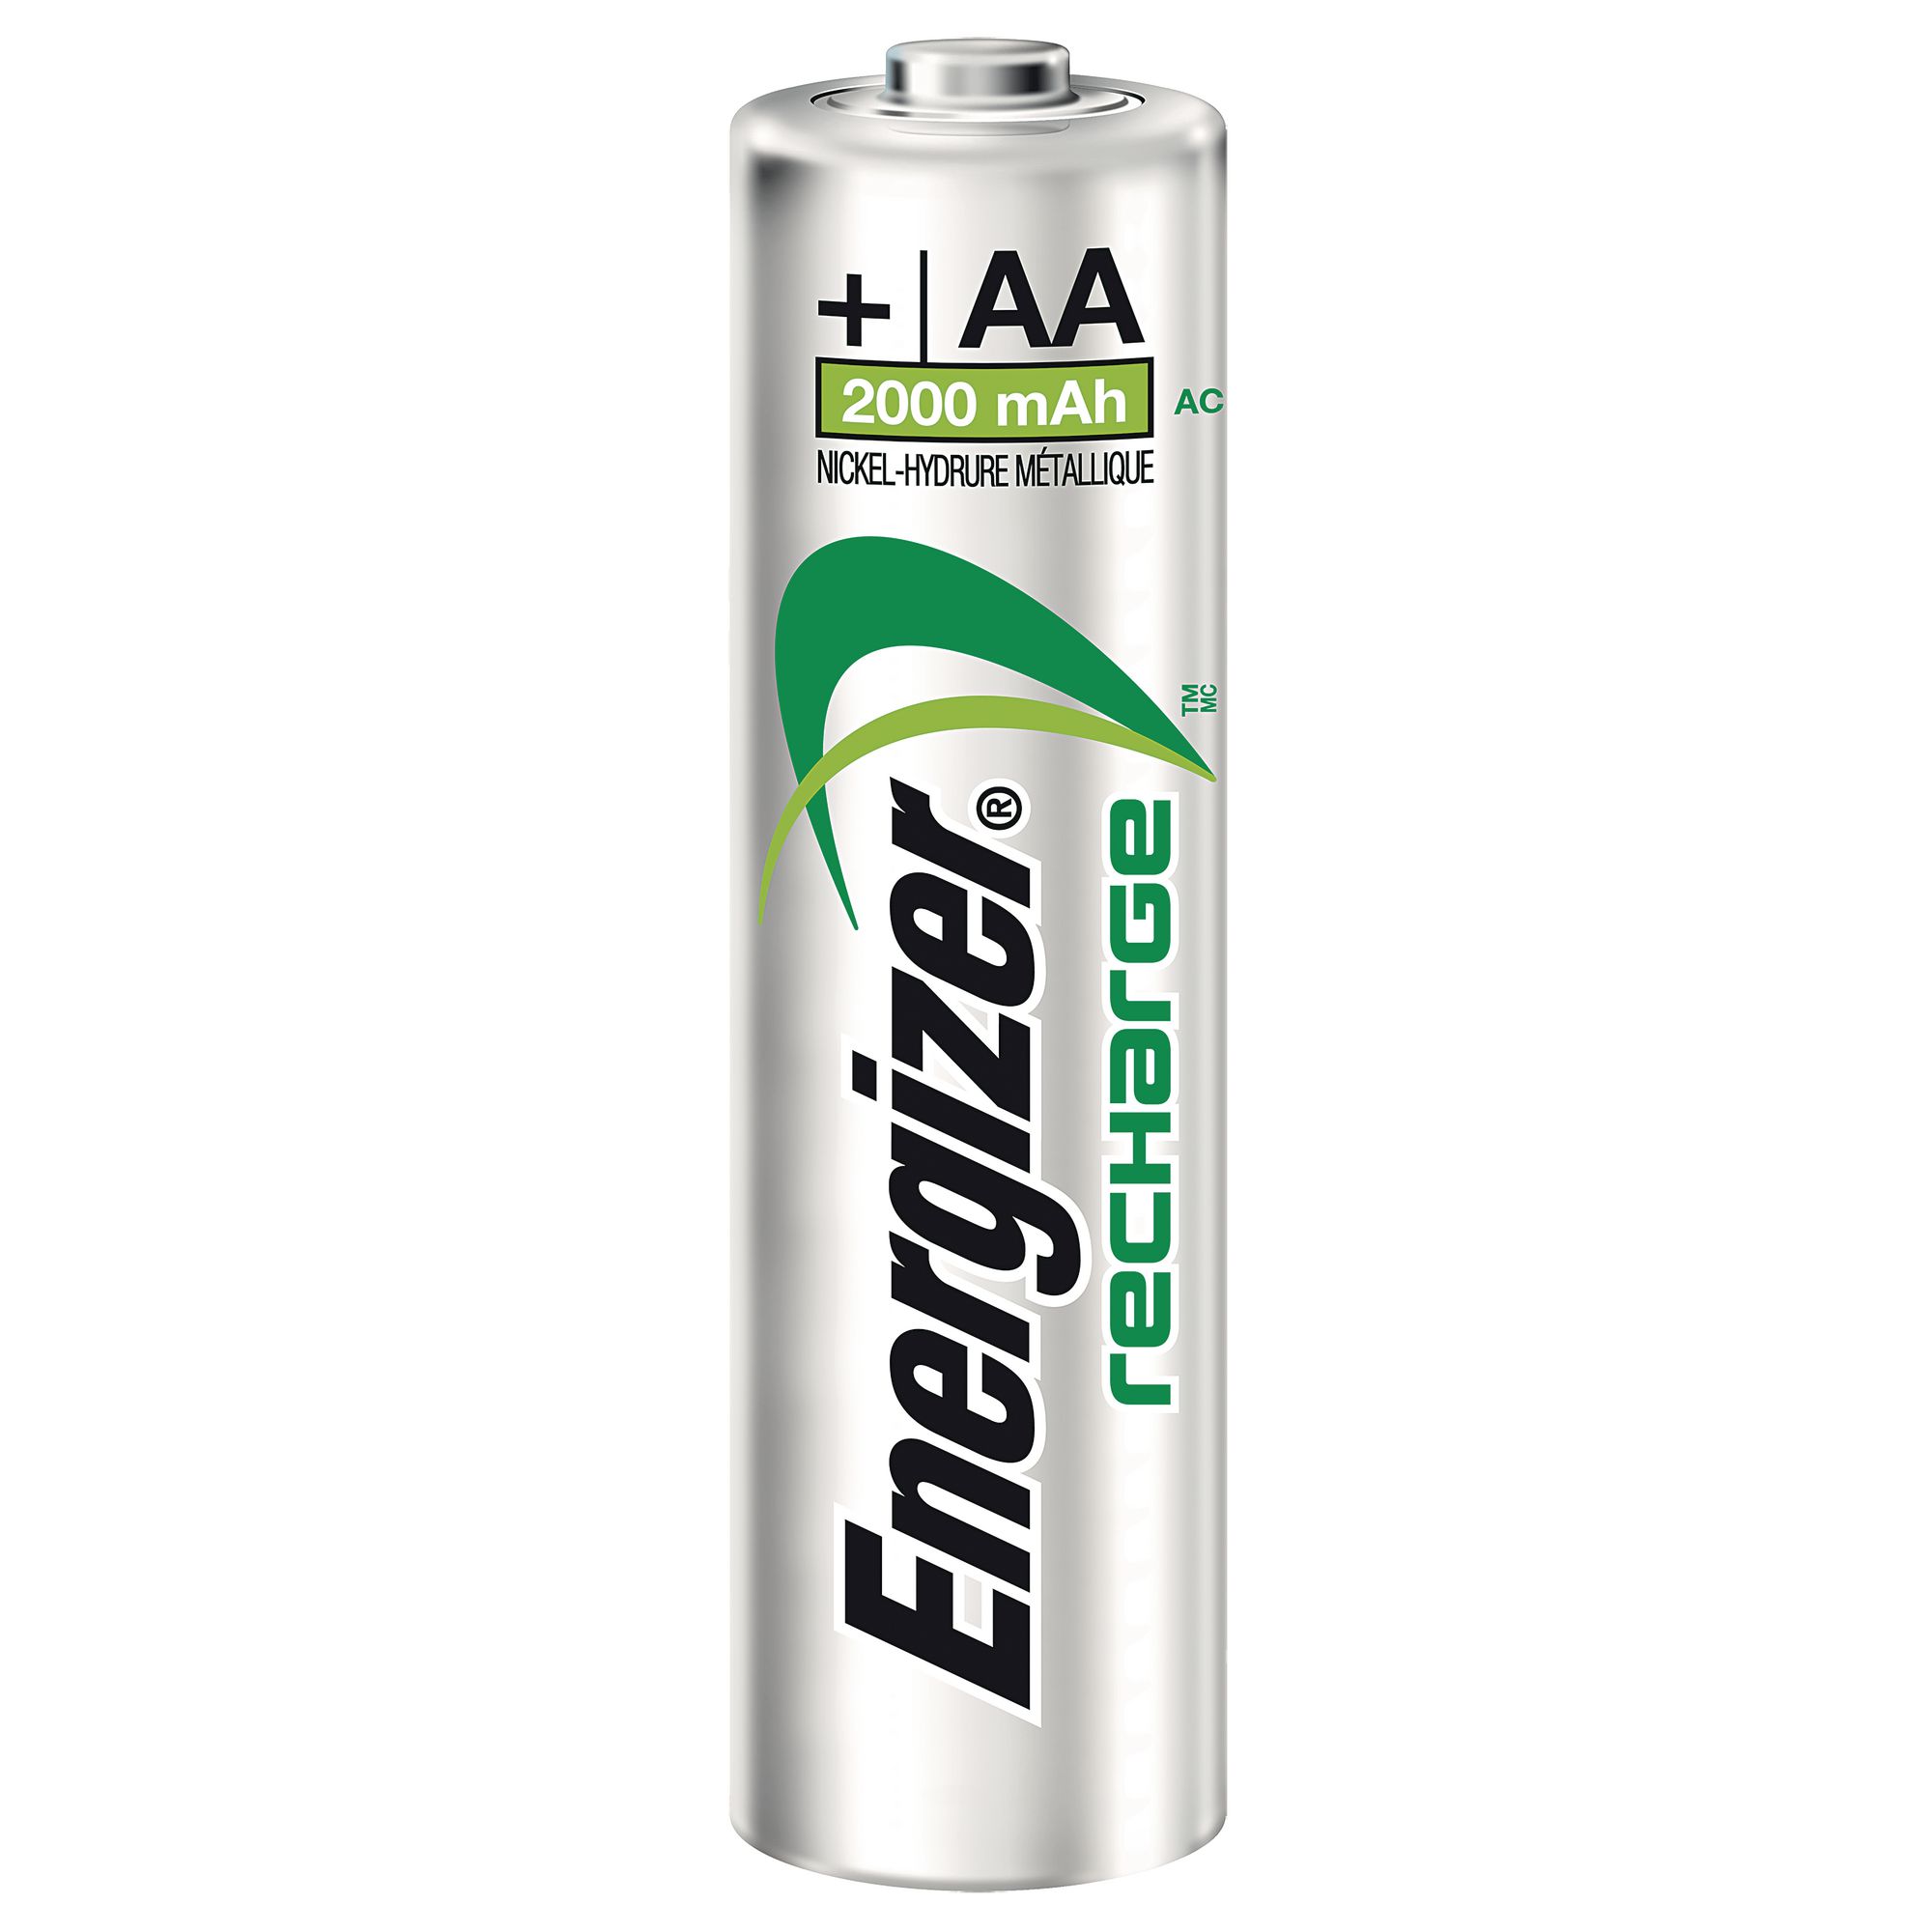 Aaa battery. Energizer AA extreme 2300. Аккумулятор ni-MH 700 ма·ч Energizer Accu Recharge Power Plus AAA. Аккумулятор ENR extreme nh15 2300 bp2 pre-Ch. Аккумуляторная батарейка Energizer Ultimate Lithium l91 fr6.